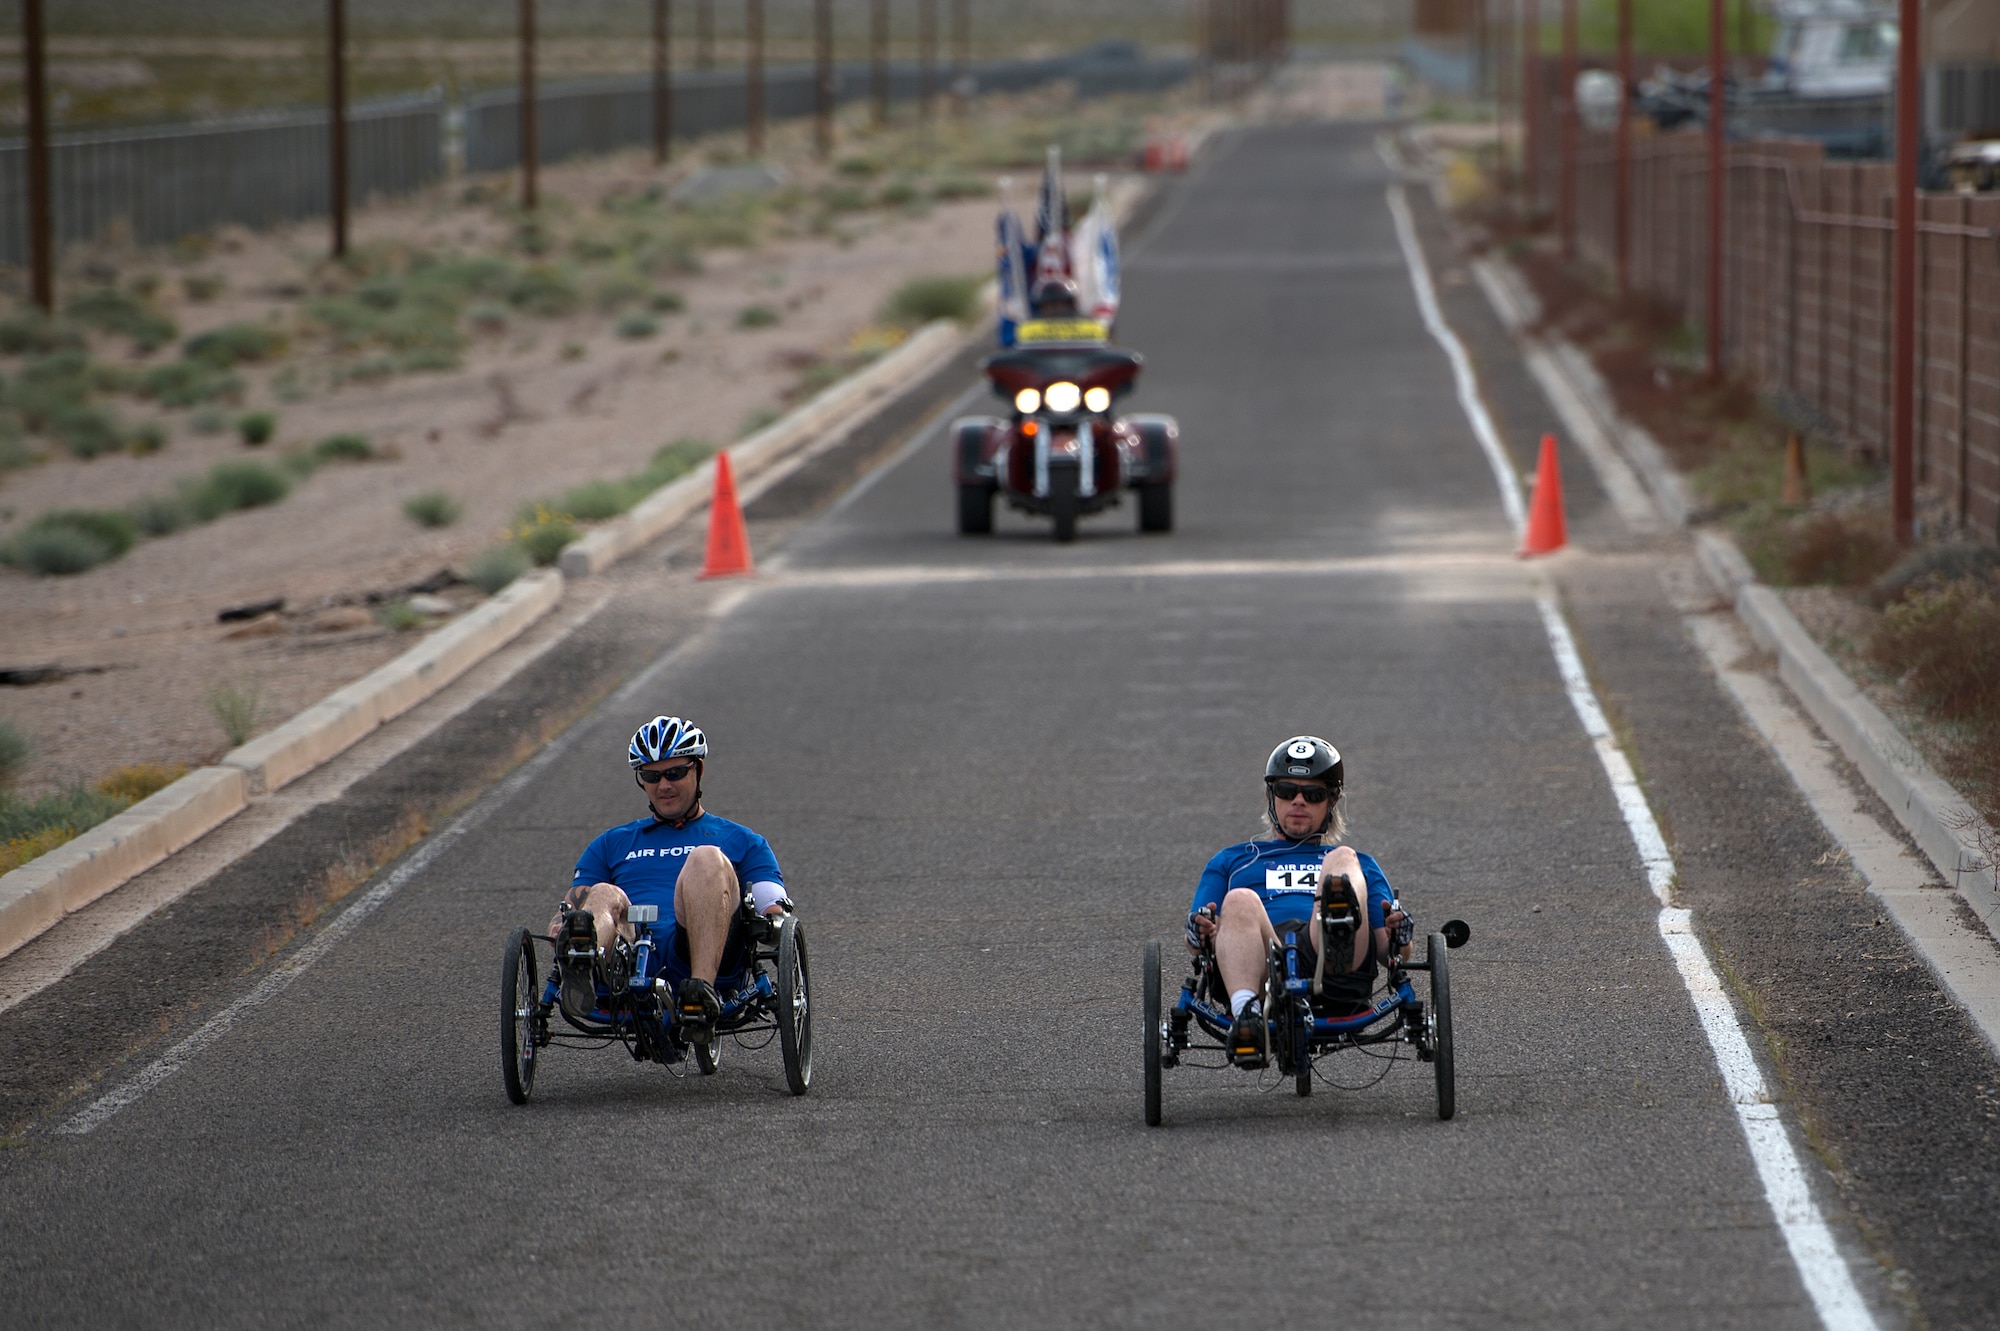 Athletes race to the finish during the men’s recumbent heat April 9, 2014, during the Air Force Trials at Nellis Air Force Base, Nev.  During the trials, injured, ill and wounded Airmen compete in Paralympic-type events to identify which members will be selected for the Warrior Games and Invictus Games teams.  (U.S. Air Force photo/Senior Airman Jette Carr)